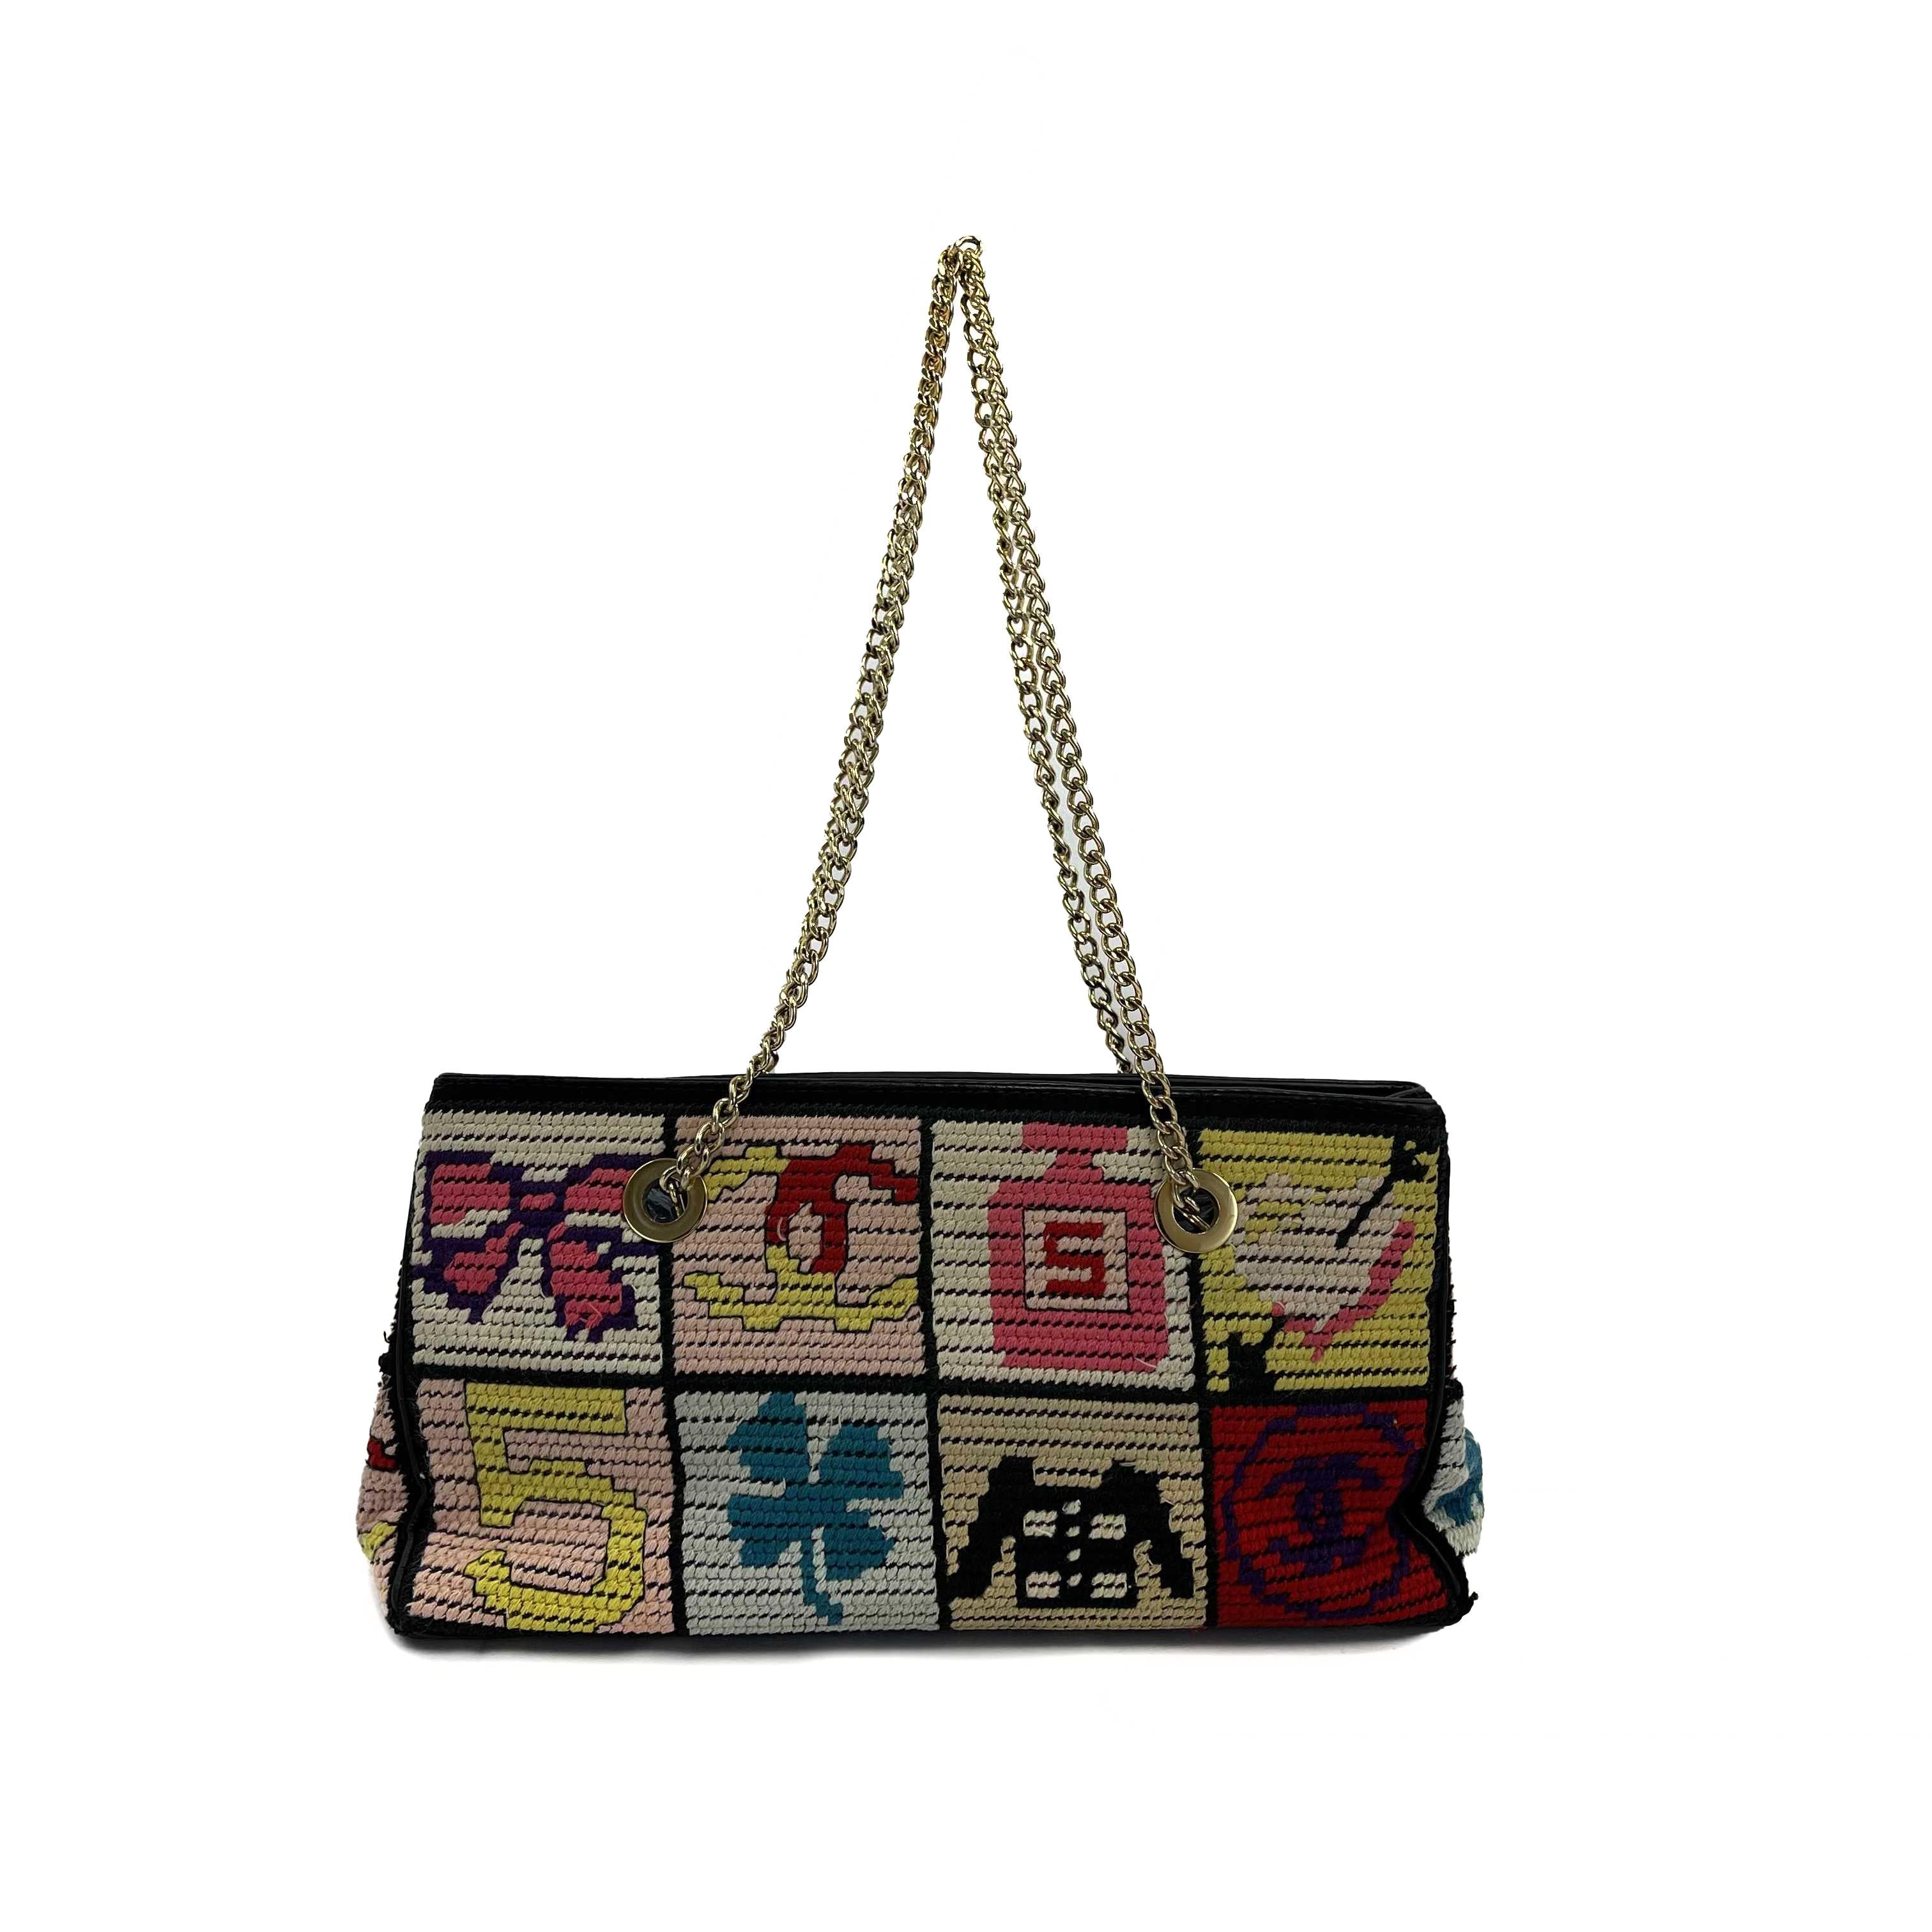 Chanel - Good - Multicolor Knit Needlepoint Patchwork Shoulder Bag - Black, Multicolor - Handbag

Description

Crafted in multicolour Crochet tweed with classic Chanel icons, this chic bag features dual-chain straps, protective base studs and